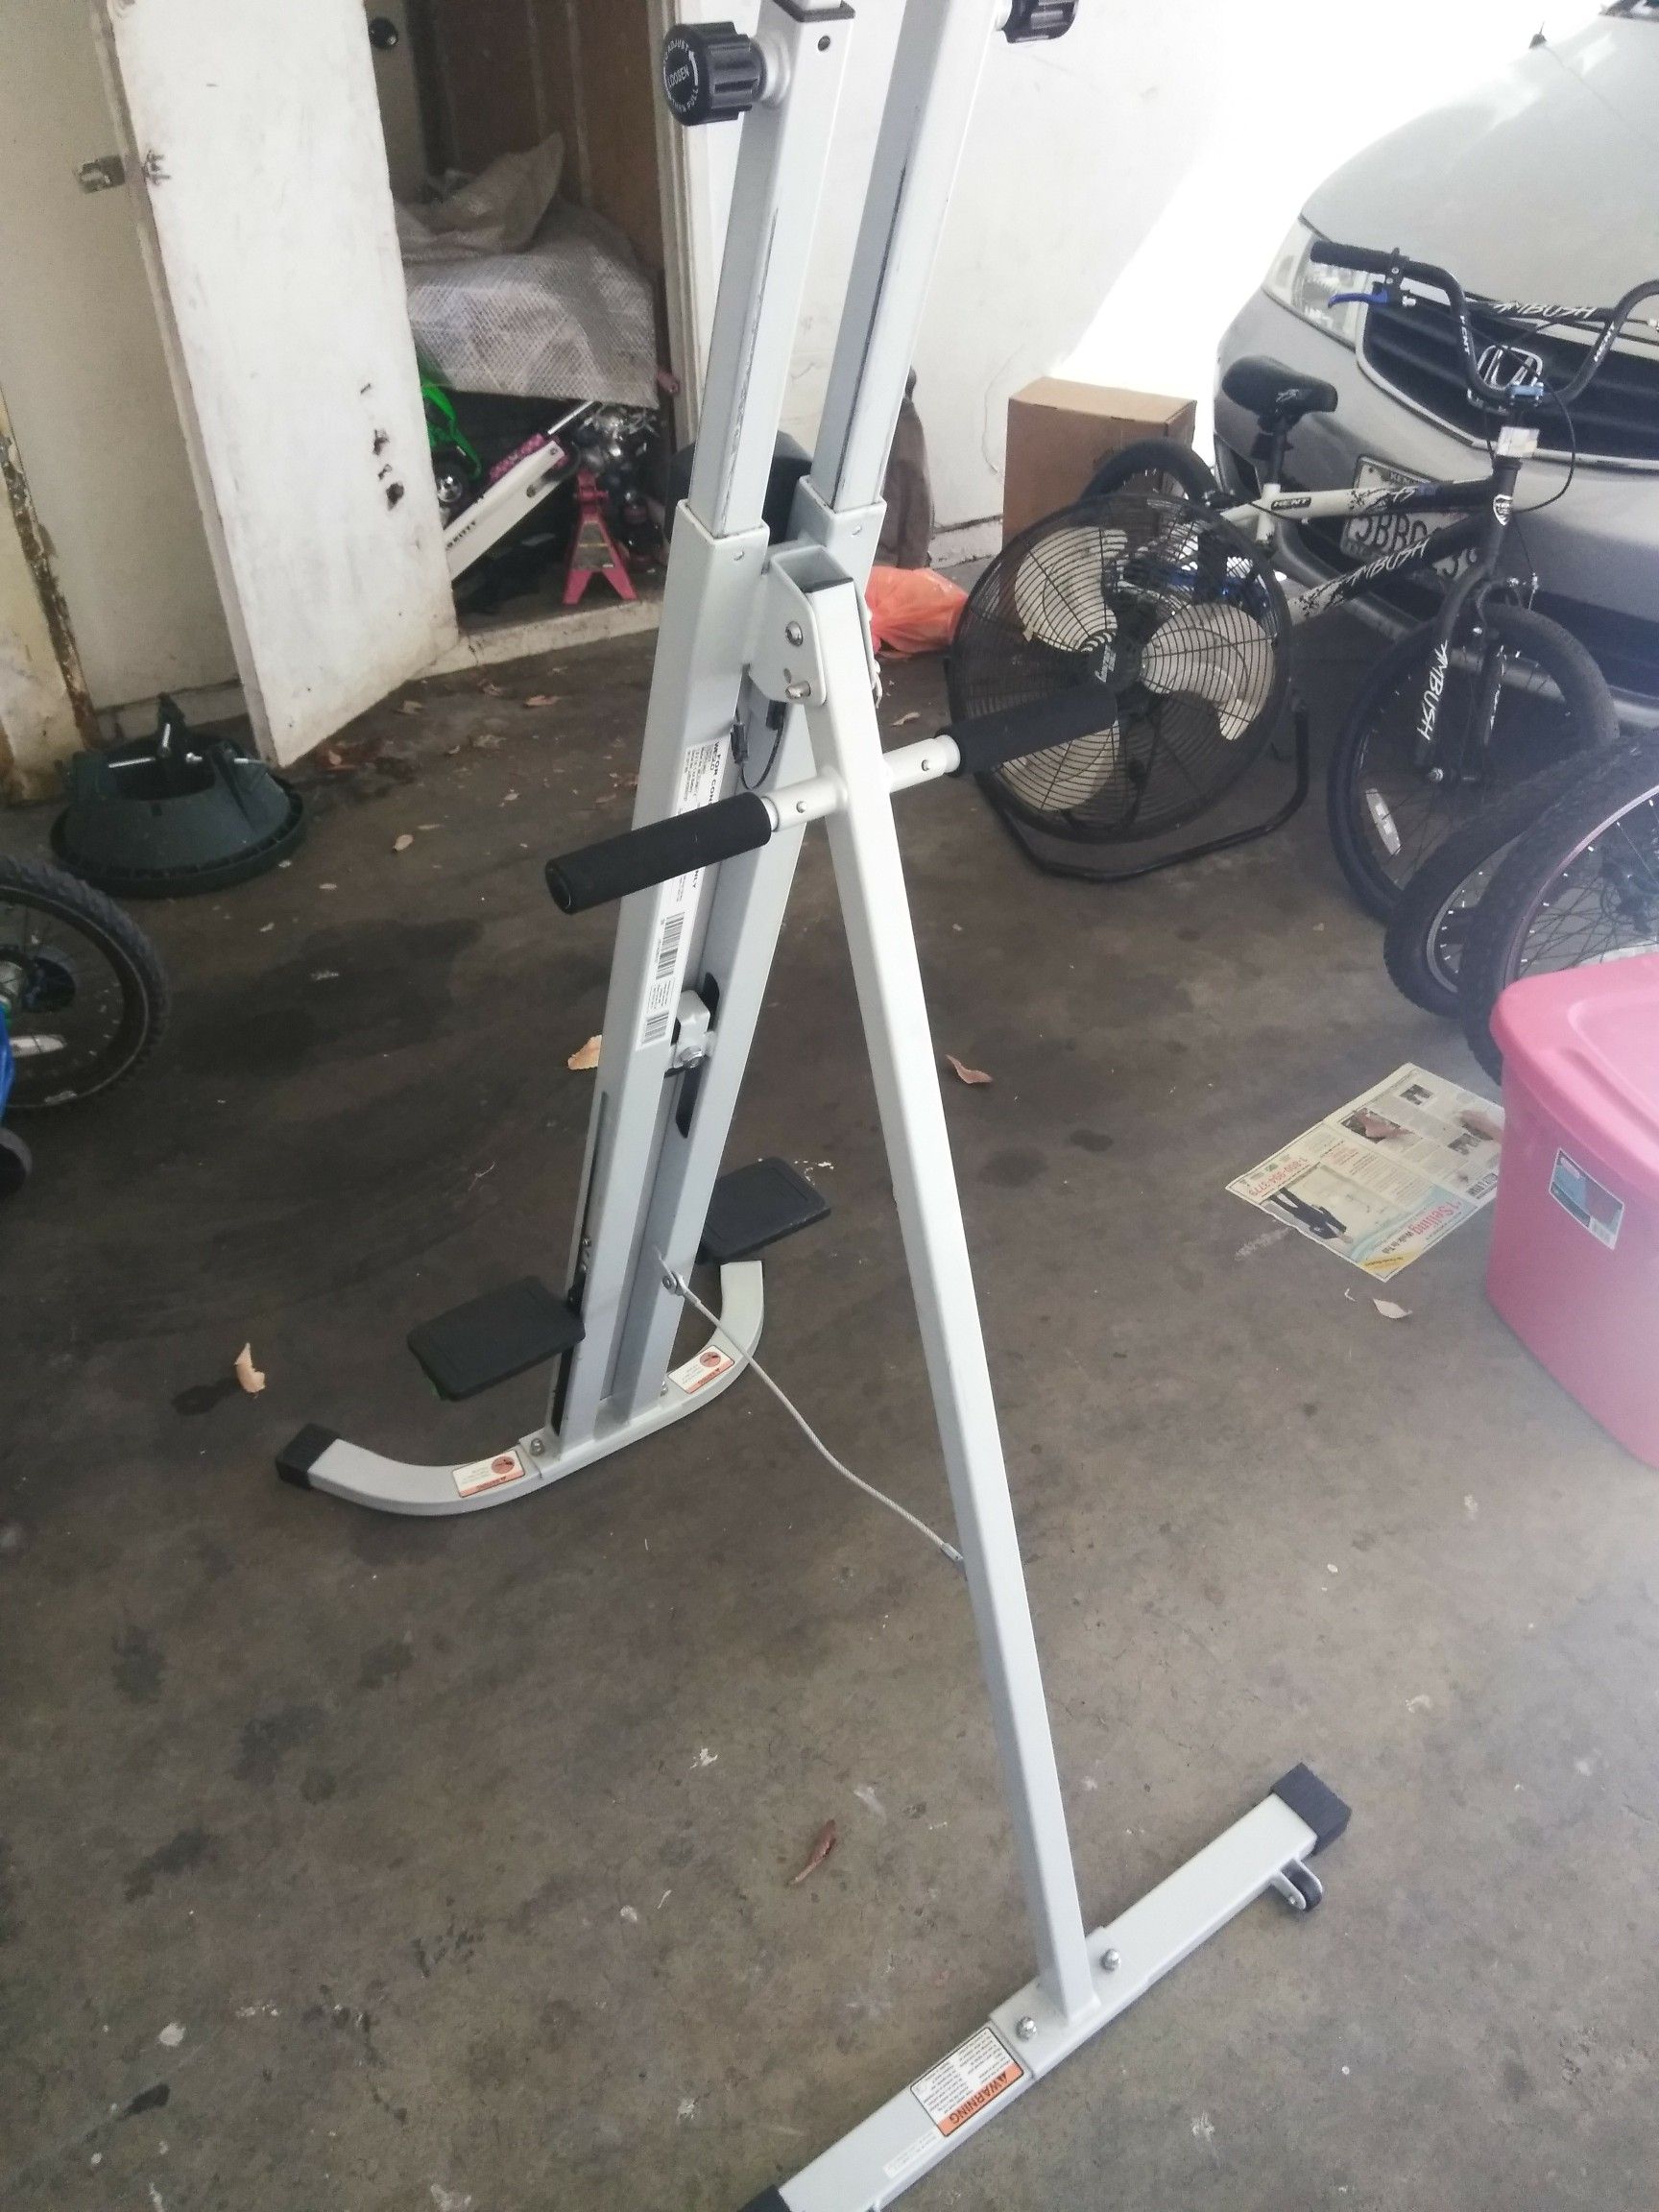 Wesco exsersise climbing machine brand new from Walmart my wife don't use it it cost me 120 but I'm selling it for 65 half price